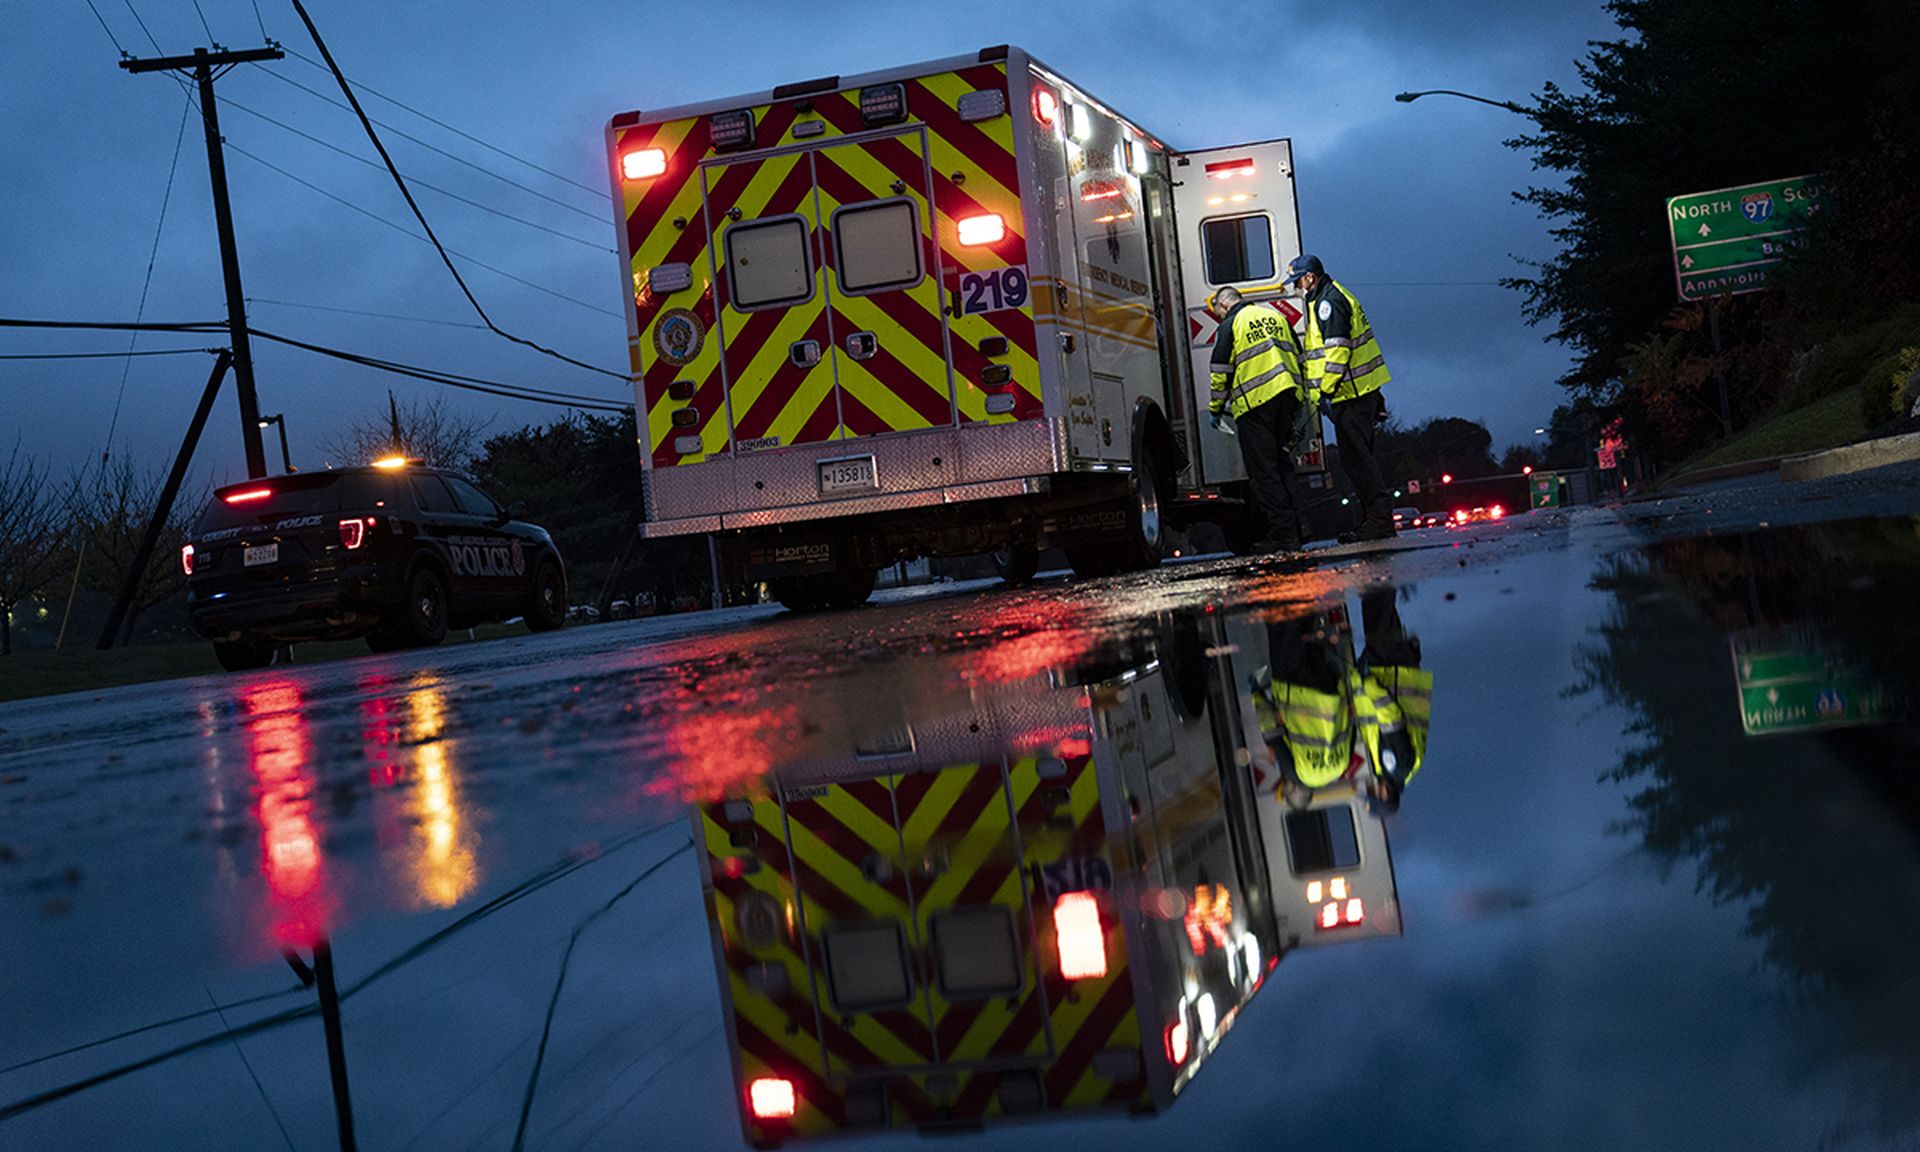 Firefighters and paramedics with Anne Arundel County Fire Department board their ambulance after loading a patient while responding to a 911 emergency call on Nov. 11, 2020, in Glen Burnie, Md. (Photo by Alex Edelman/Getty Images)